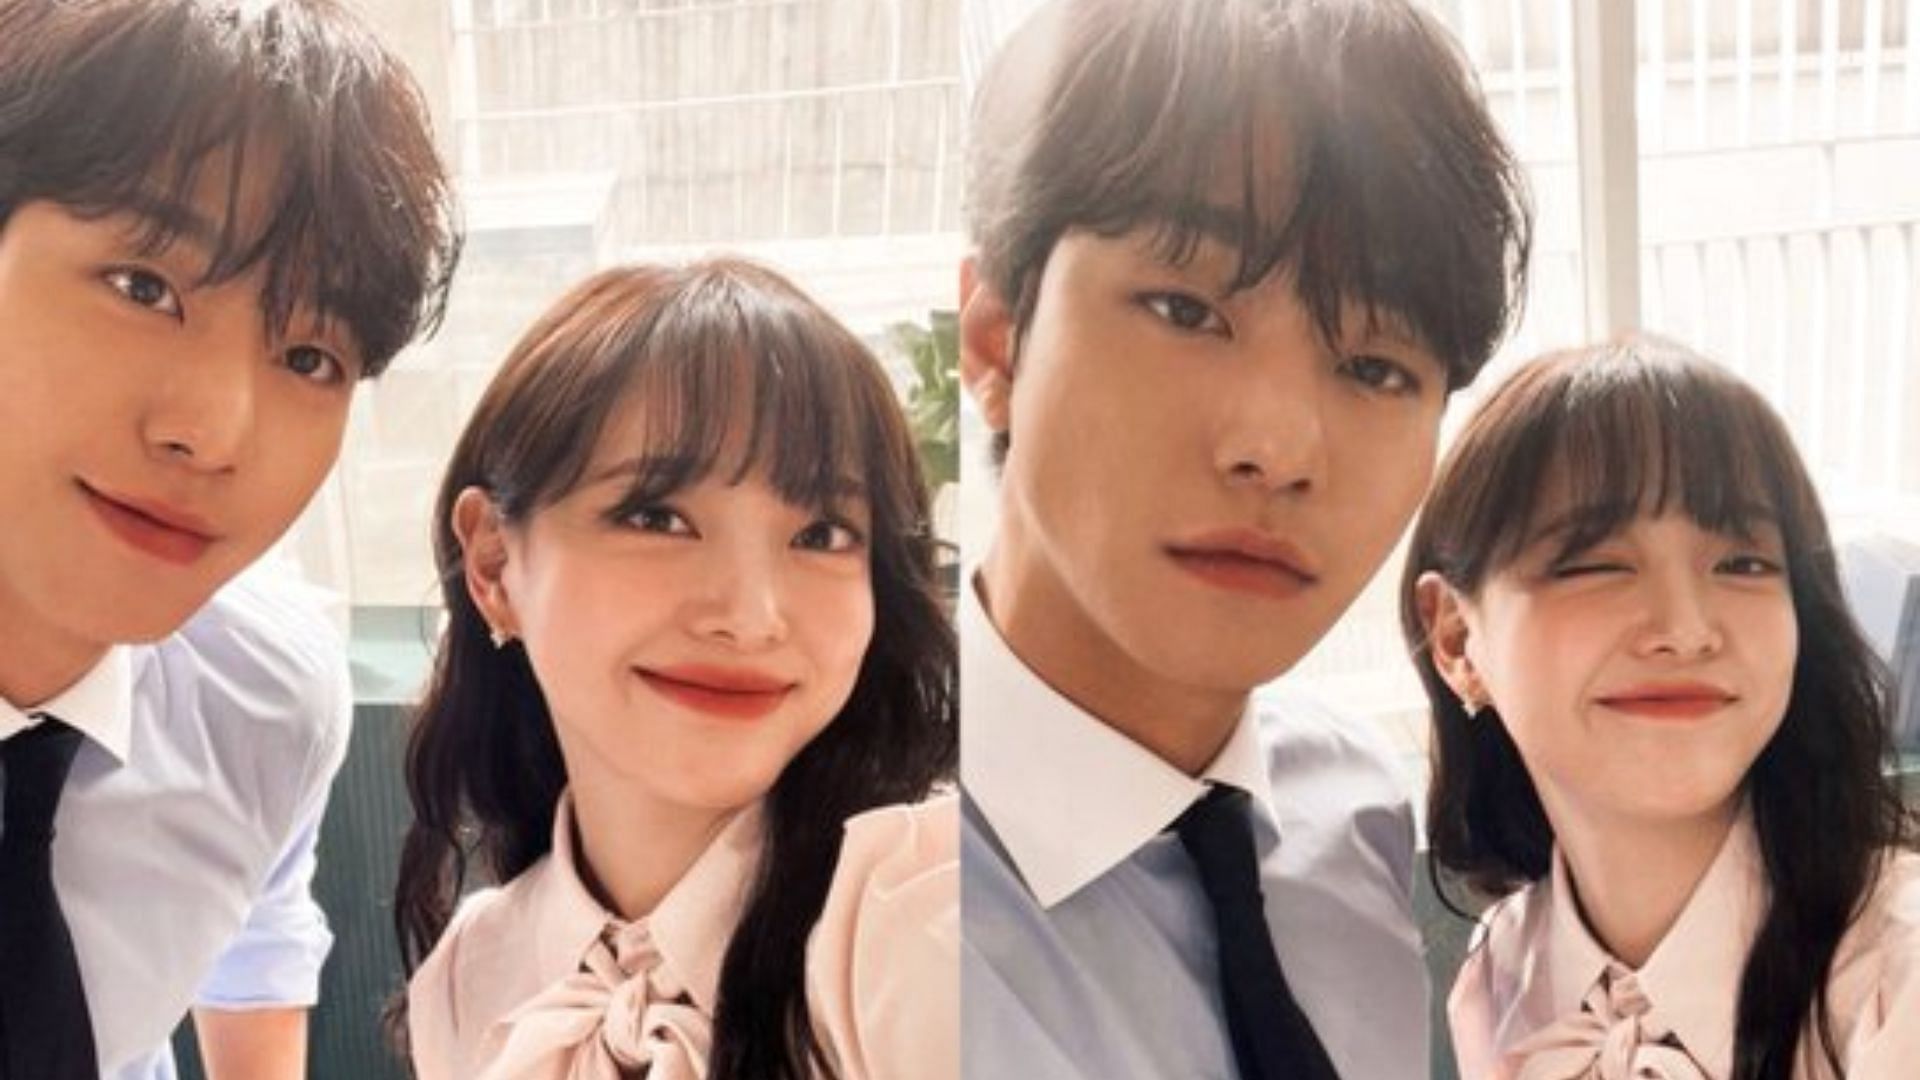 Business Proposal co-stars Ahn Hyo-seop and Kim Se-jeong will star in a CF together (Image via Twitter/@MIC_MIC_13)